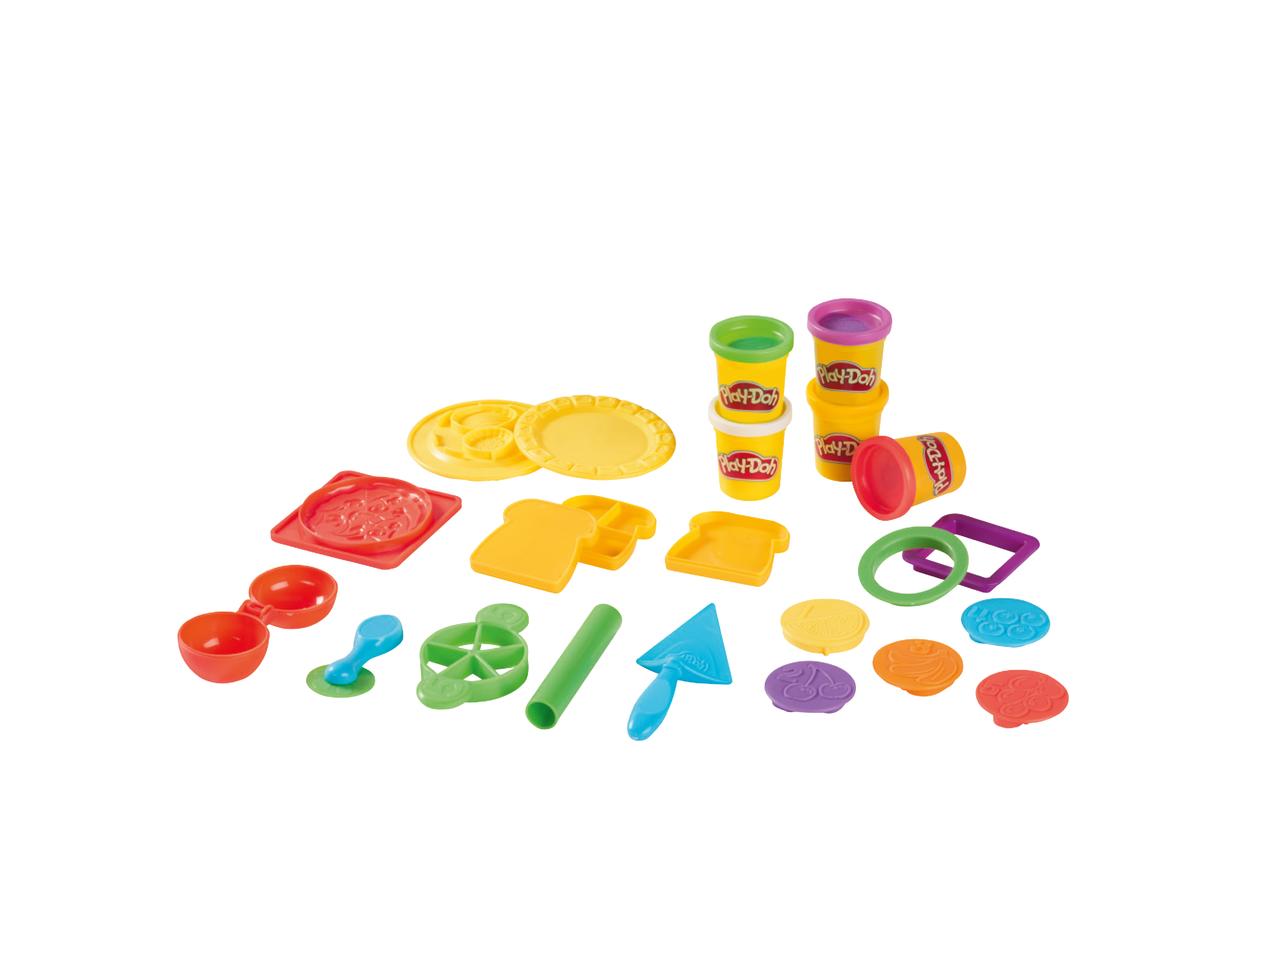 PLAY-DOH Play-Doh Snack Set